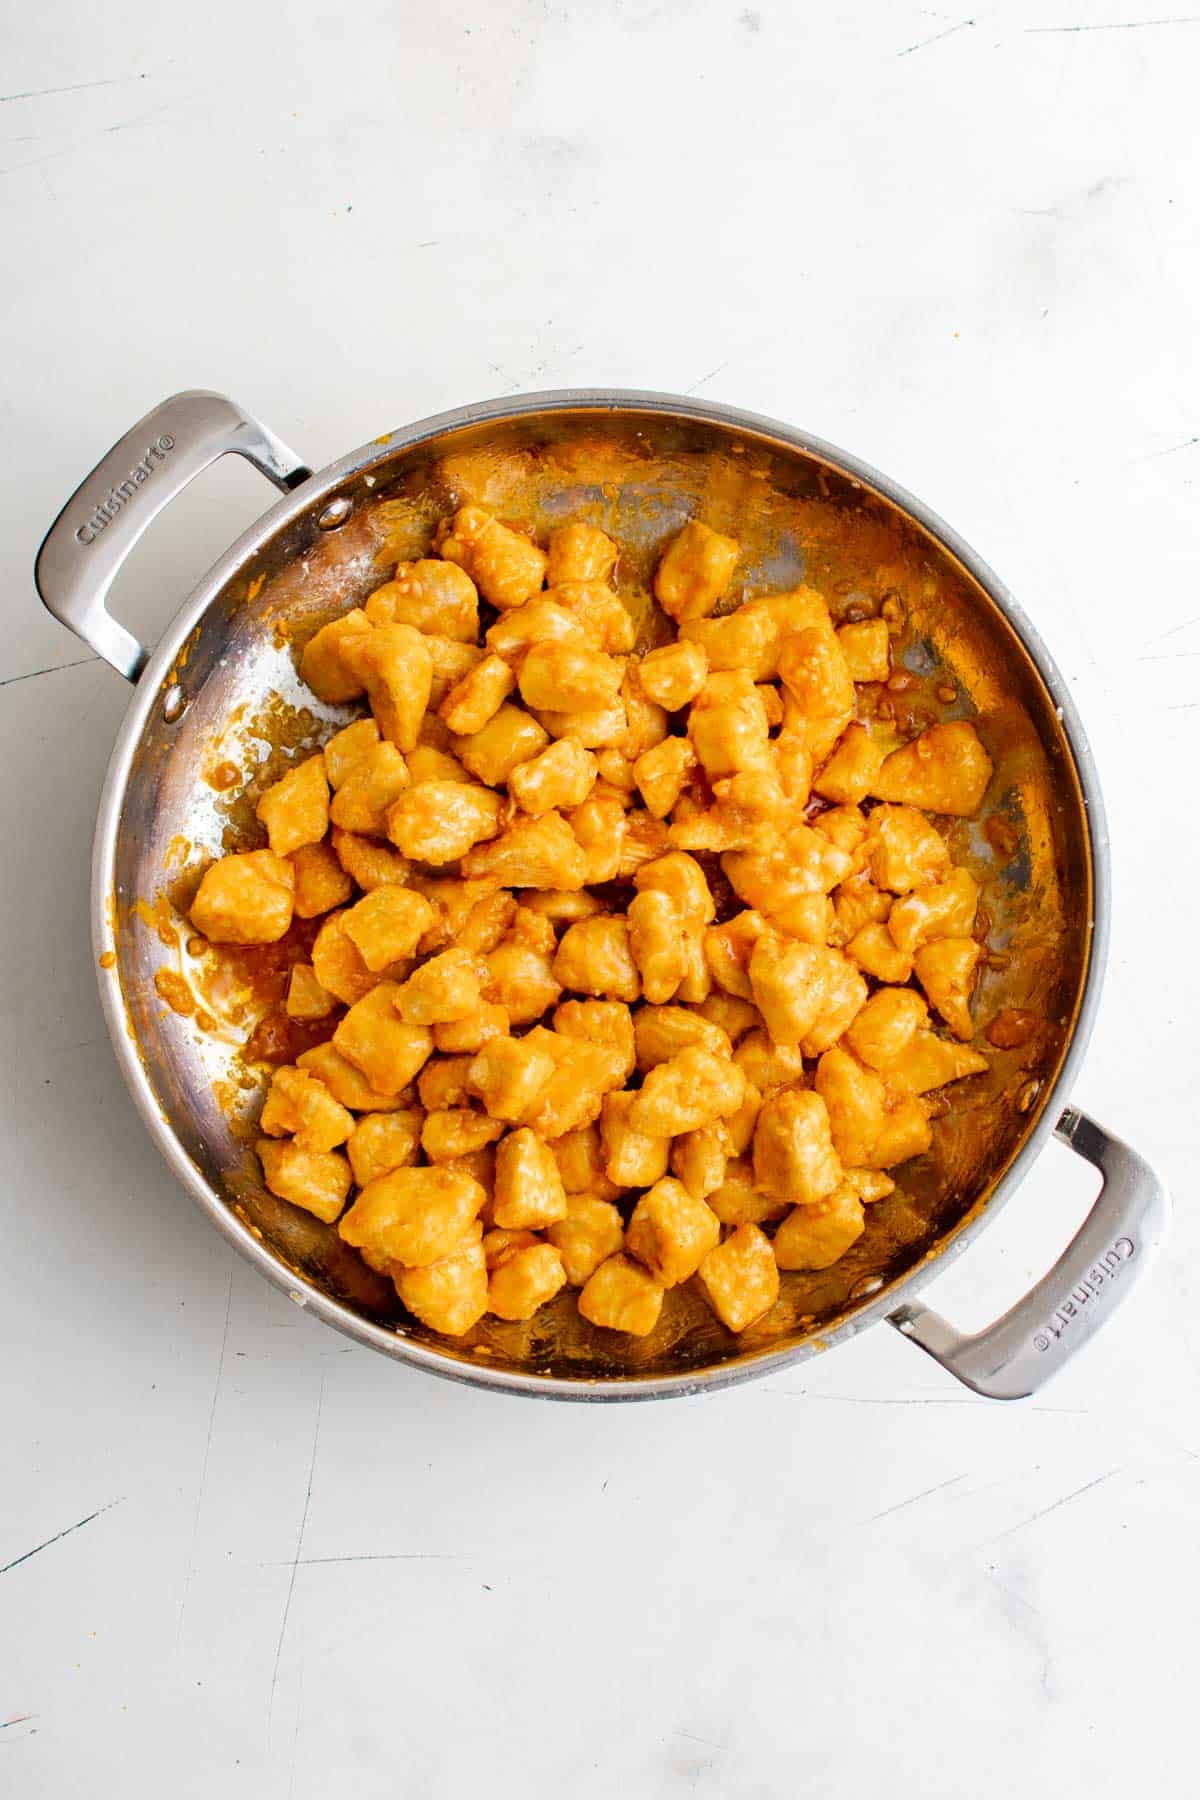 Top view of chicken bites coated in buffalo sauce in a metal skillet.